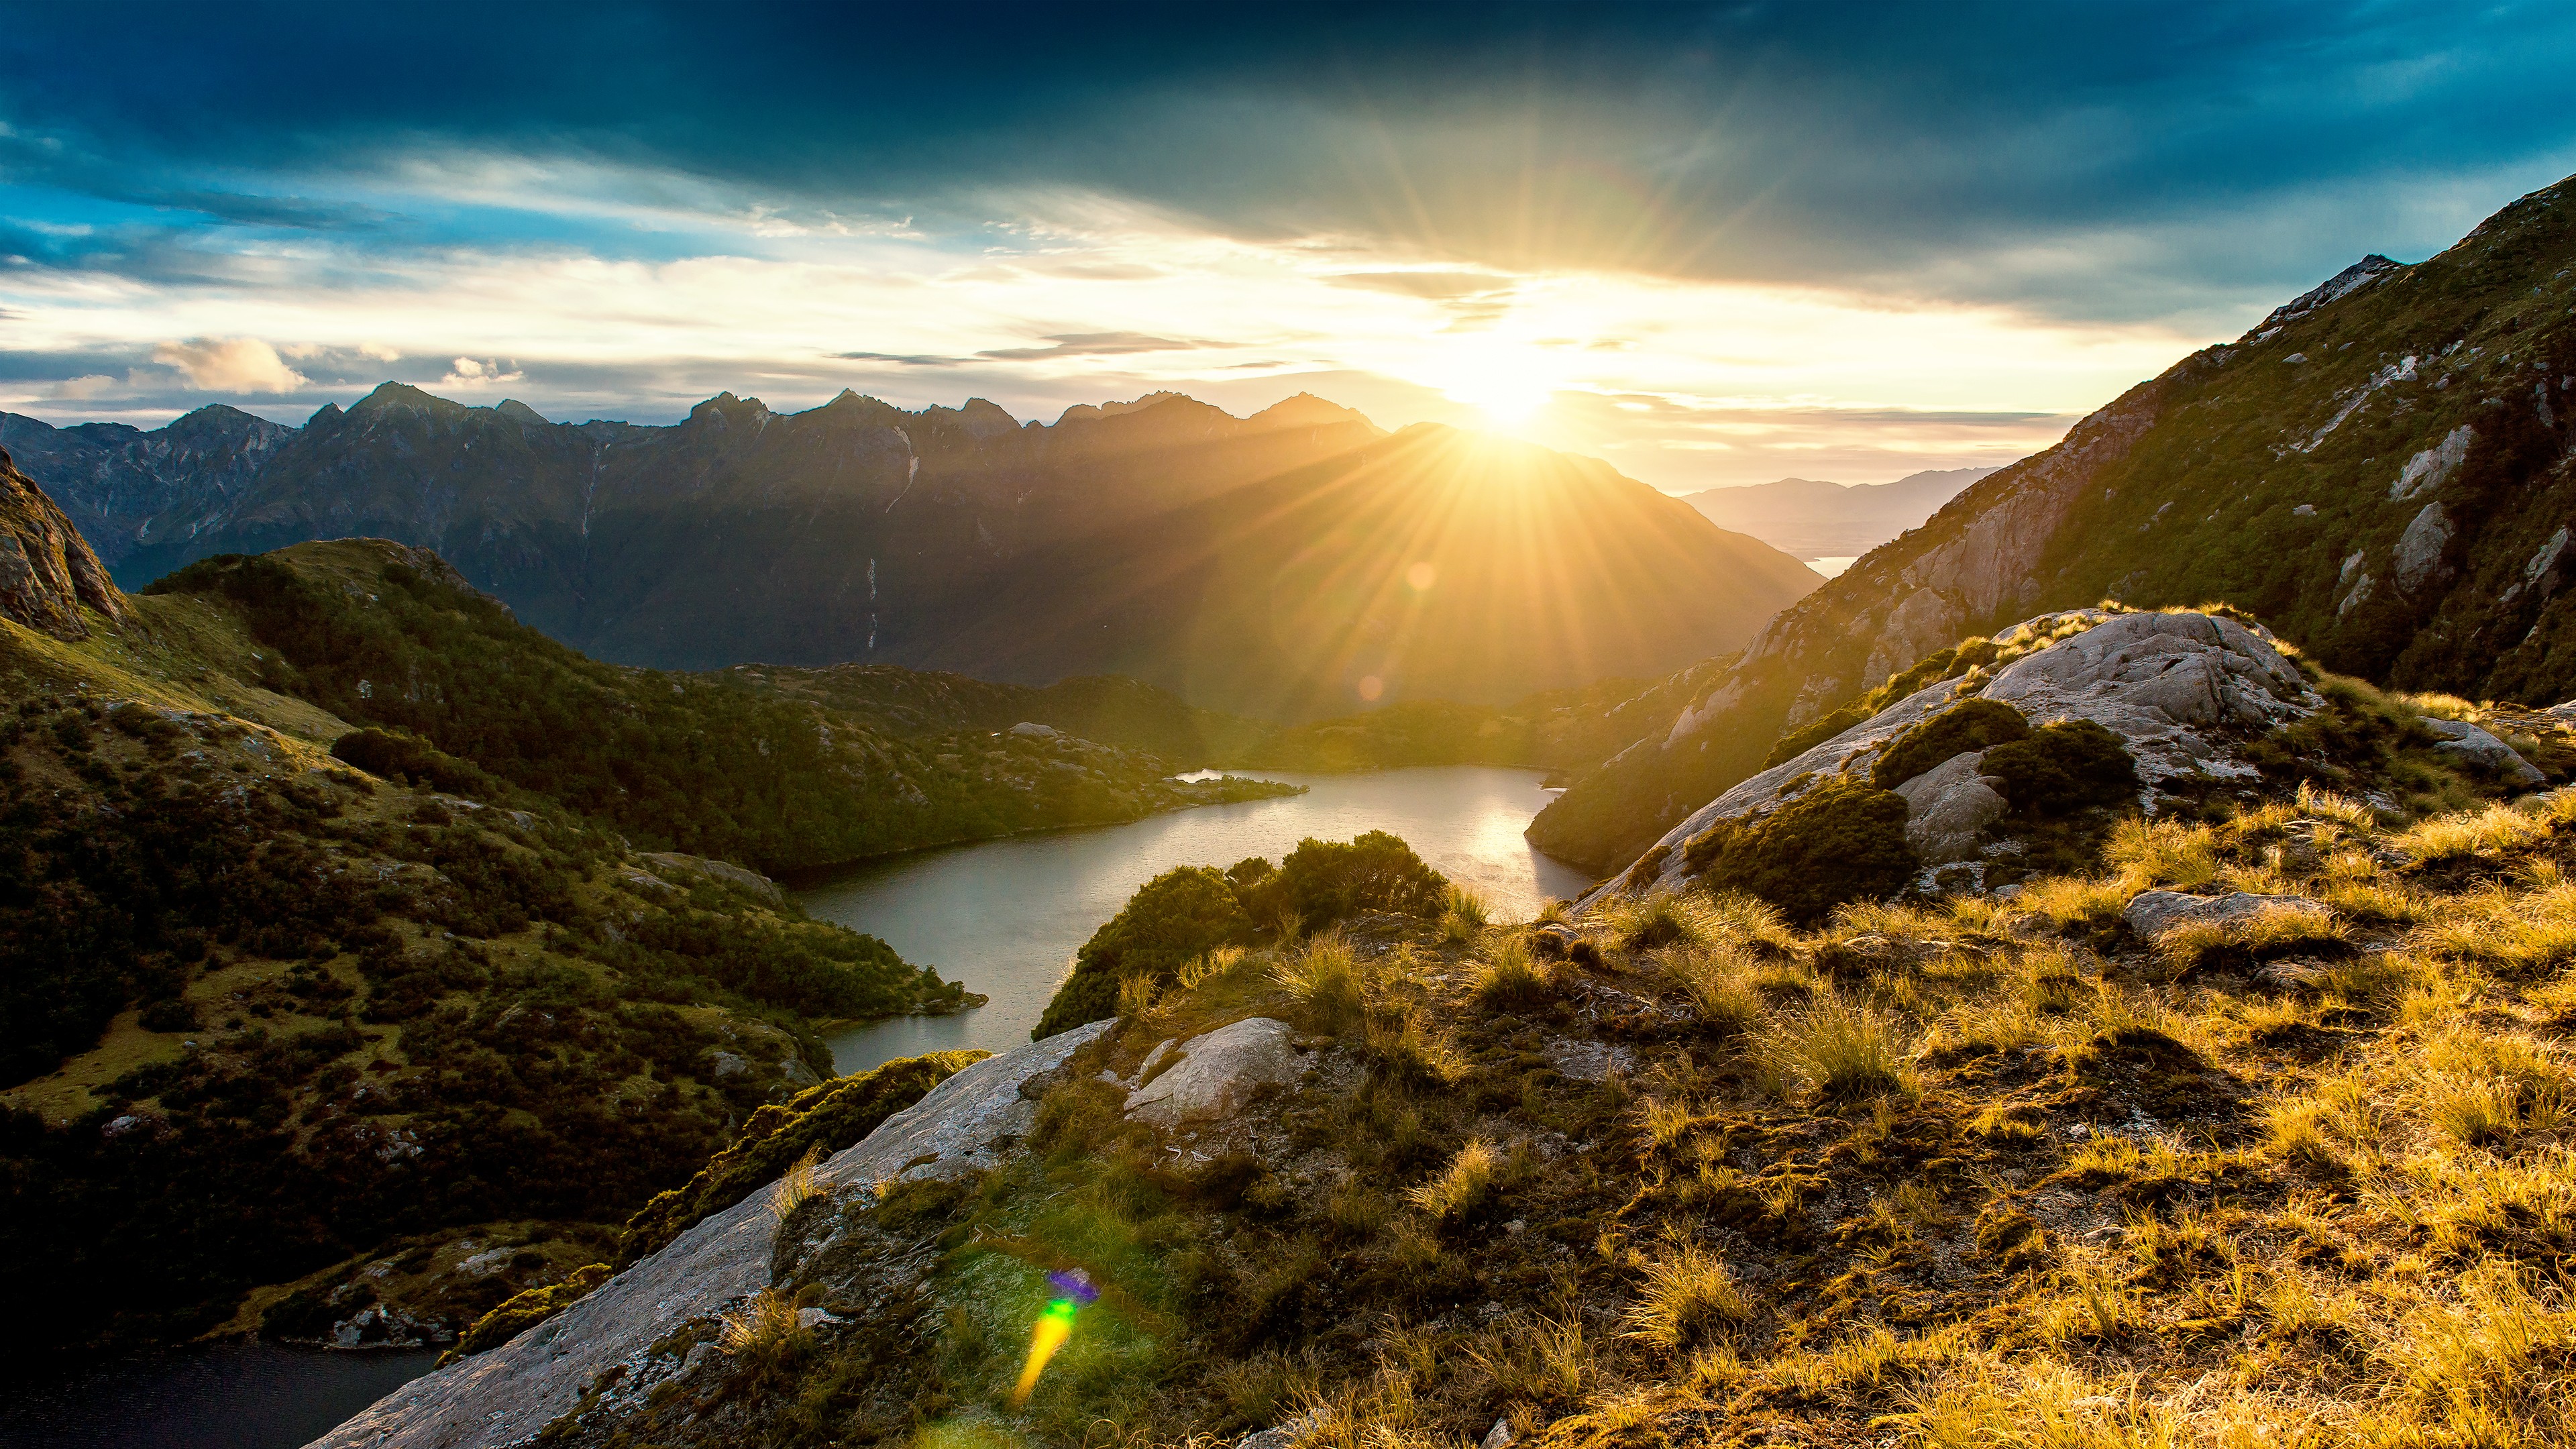 General 3840x2160 fjord landscape sun rays mountains lens flare nature sunlight